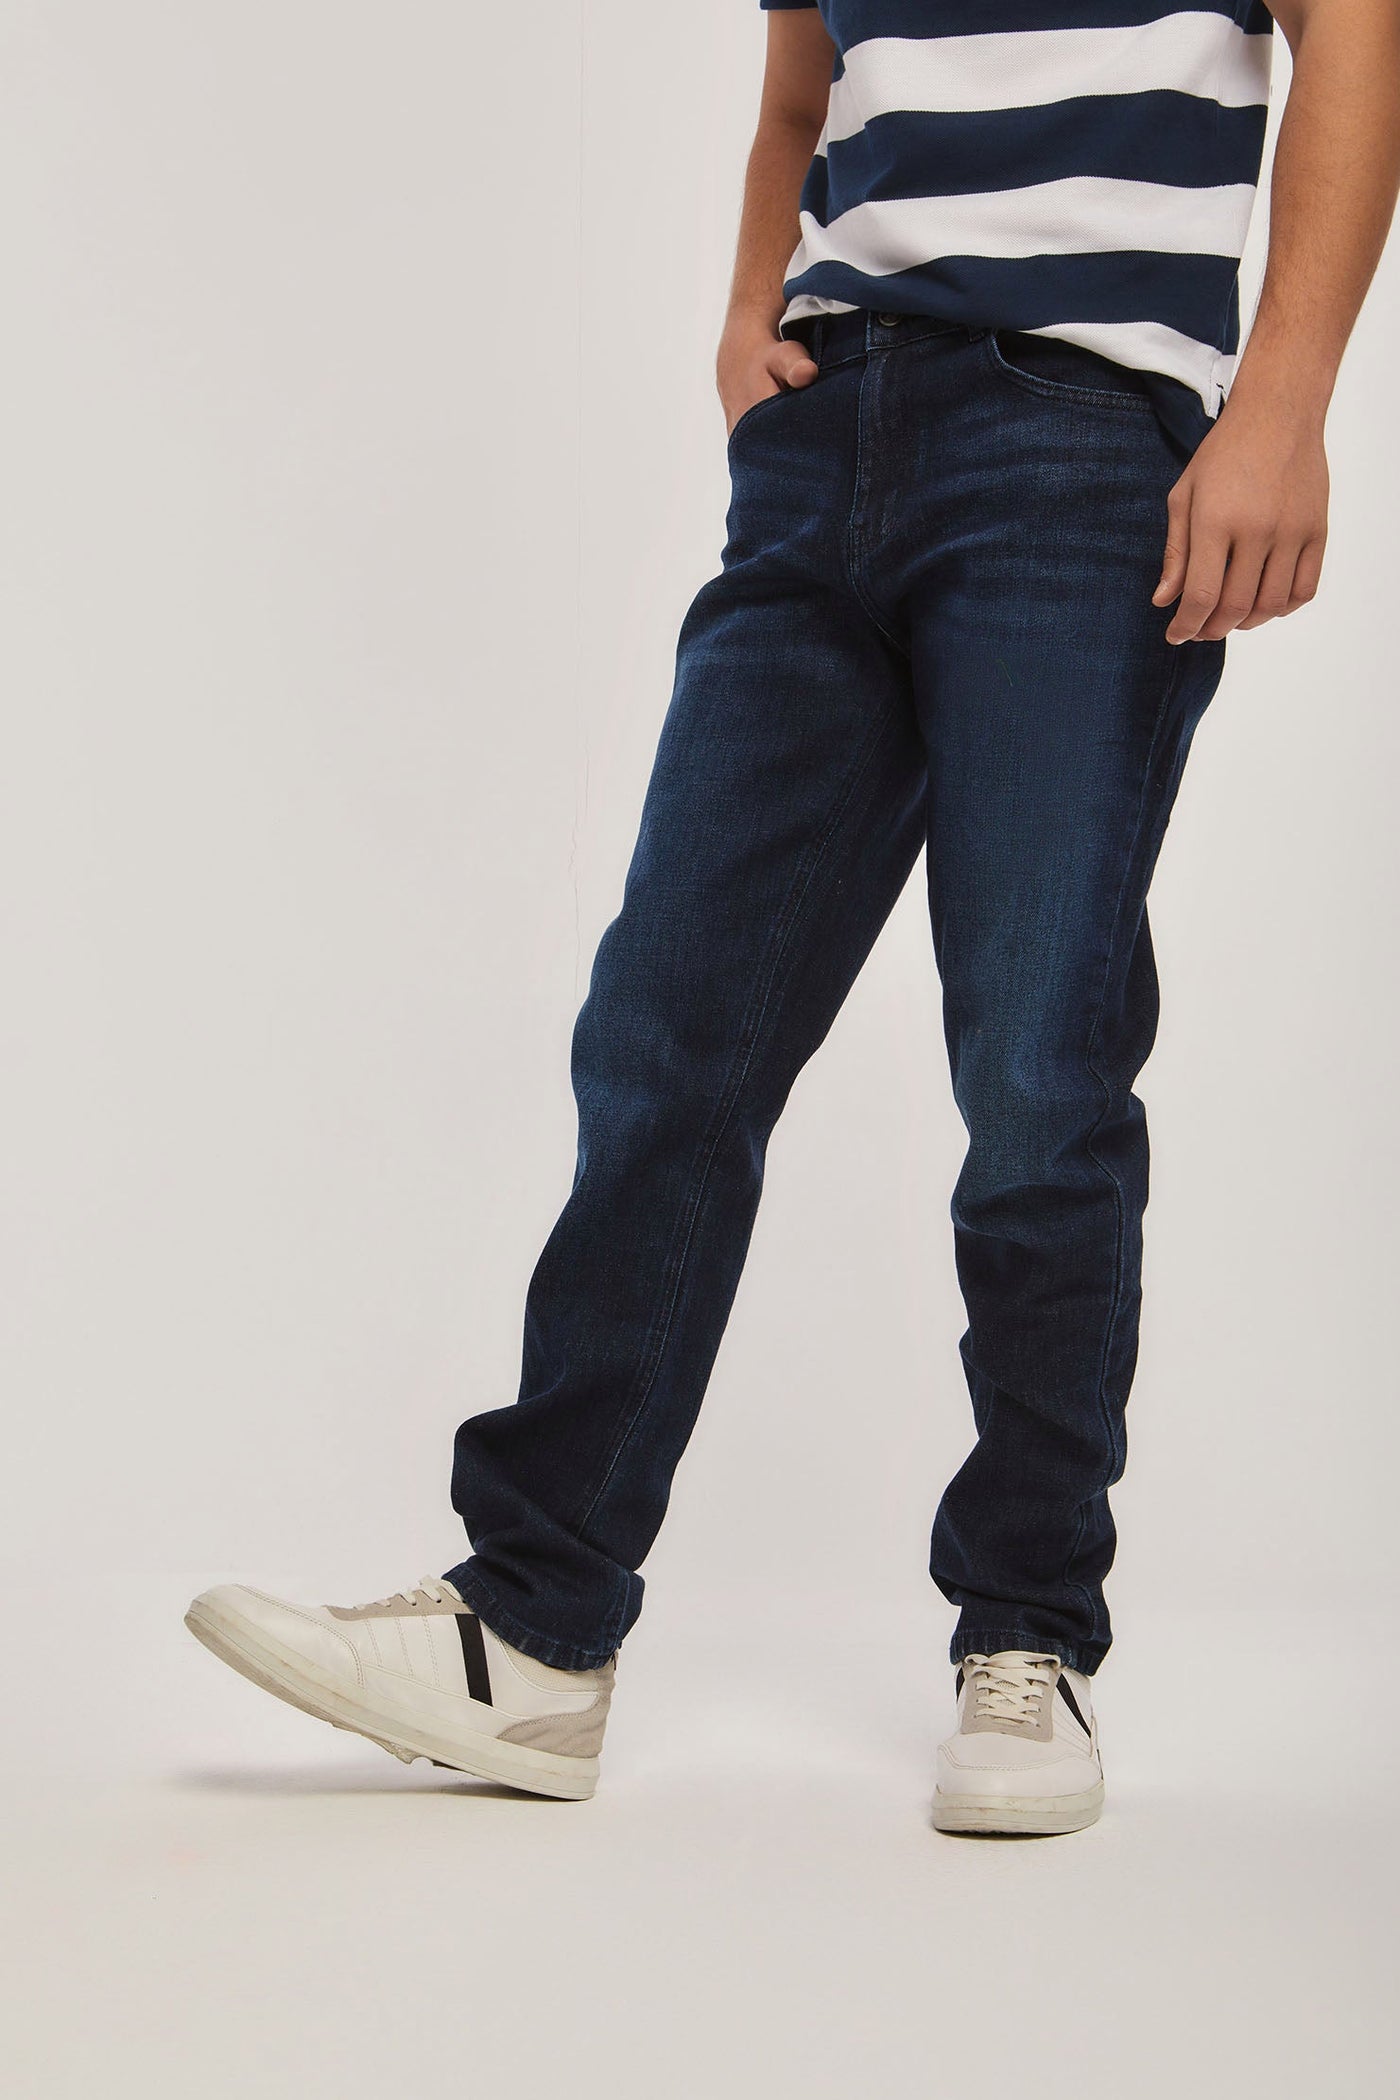 Jeans - Regular Fit - Washed Out